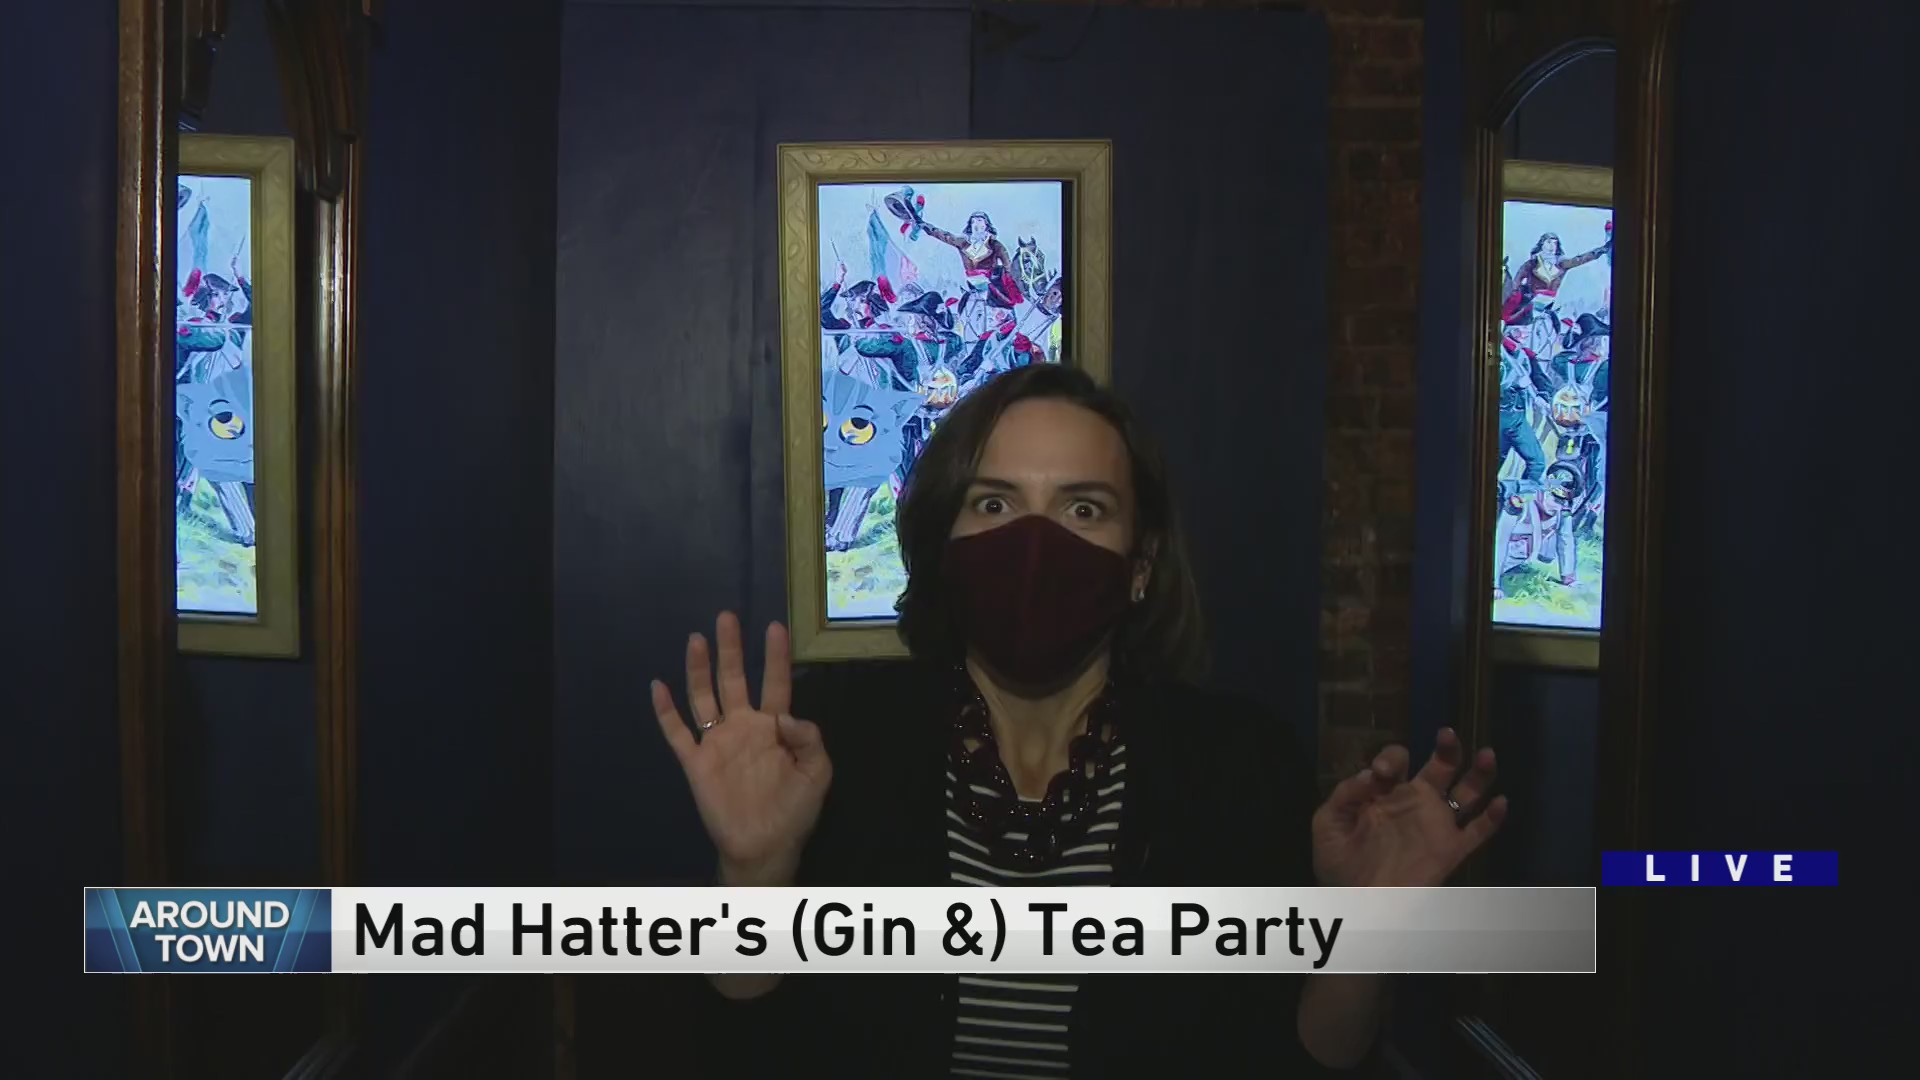 Around Town checks out the Mad Hatter’s (Gin &) Tea Party